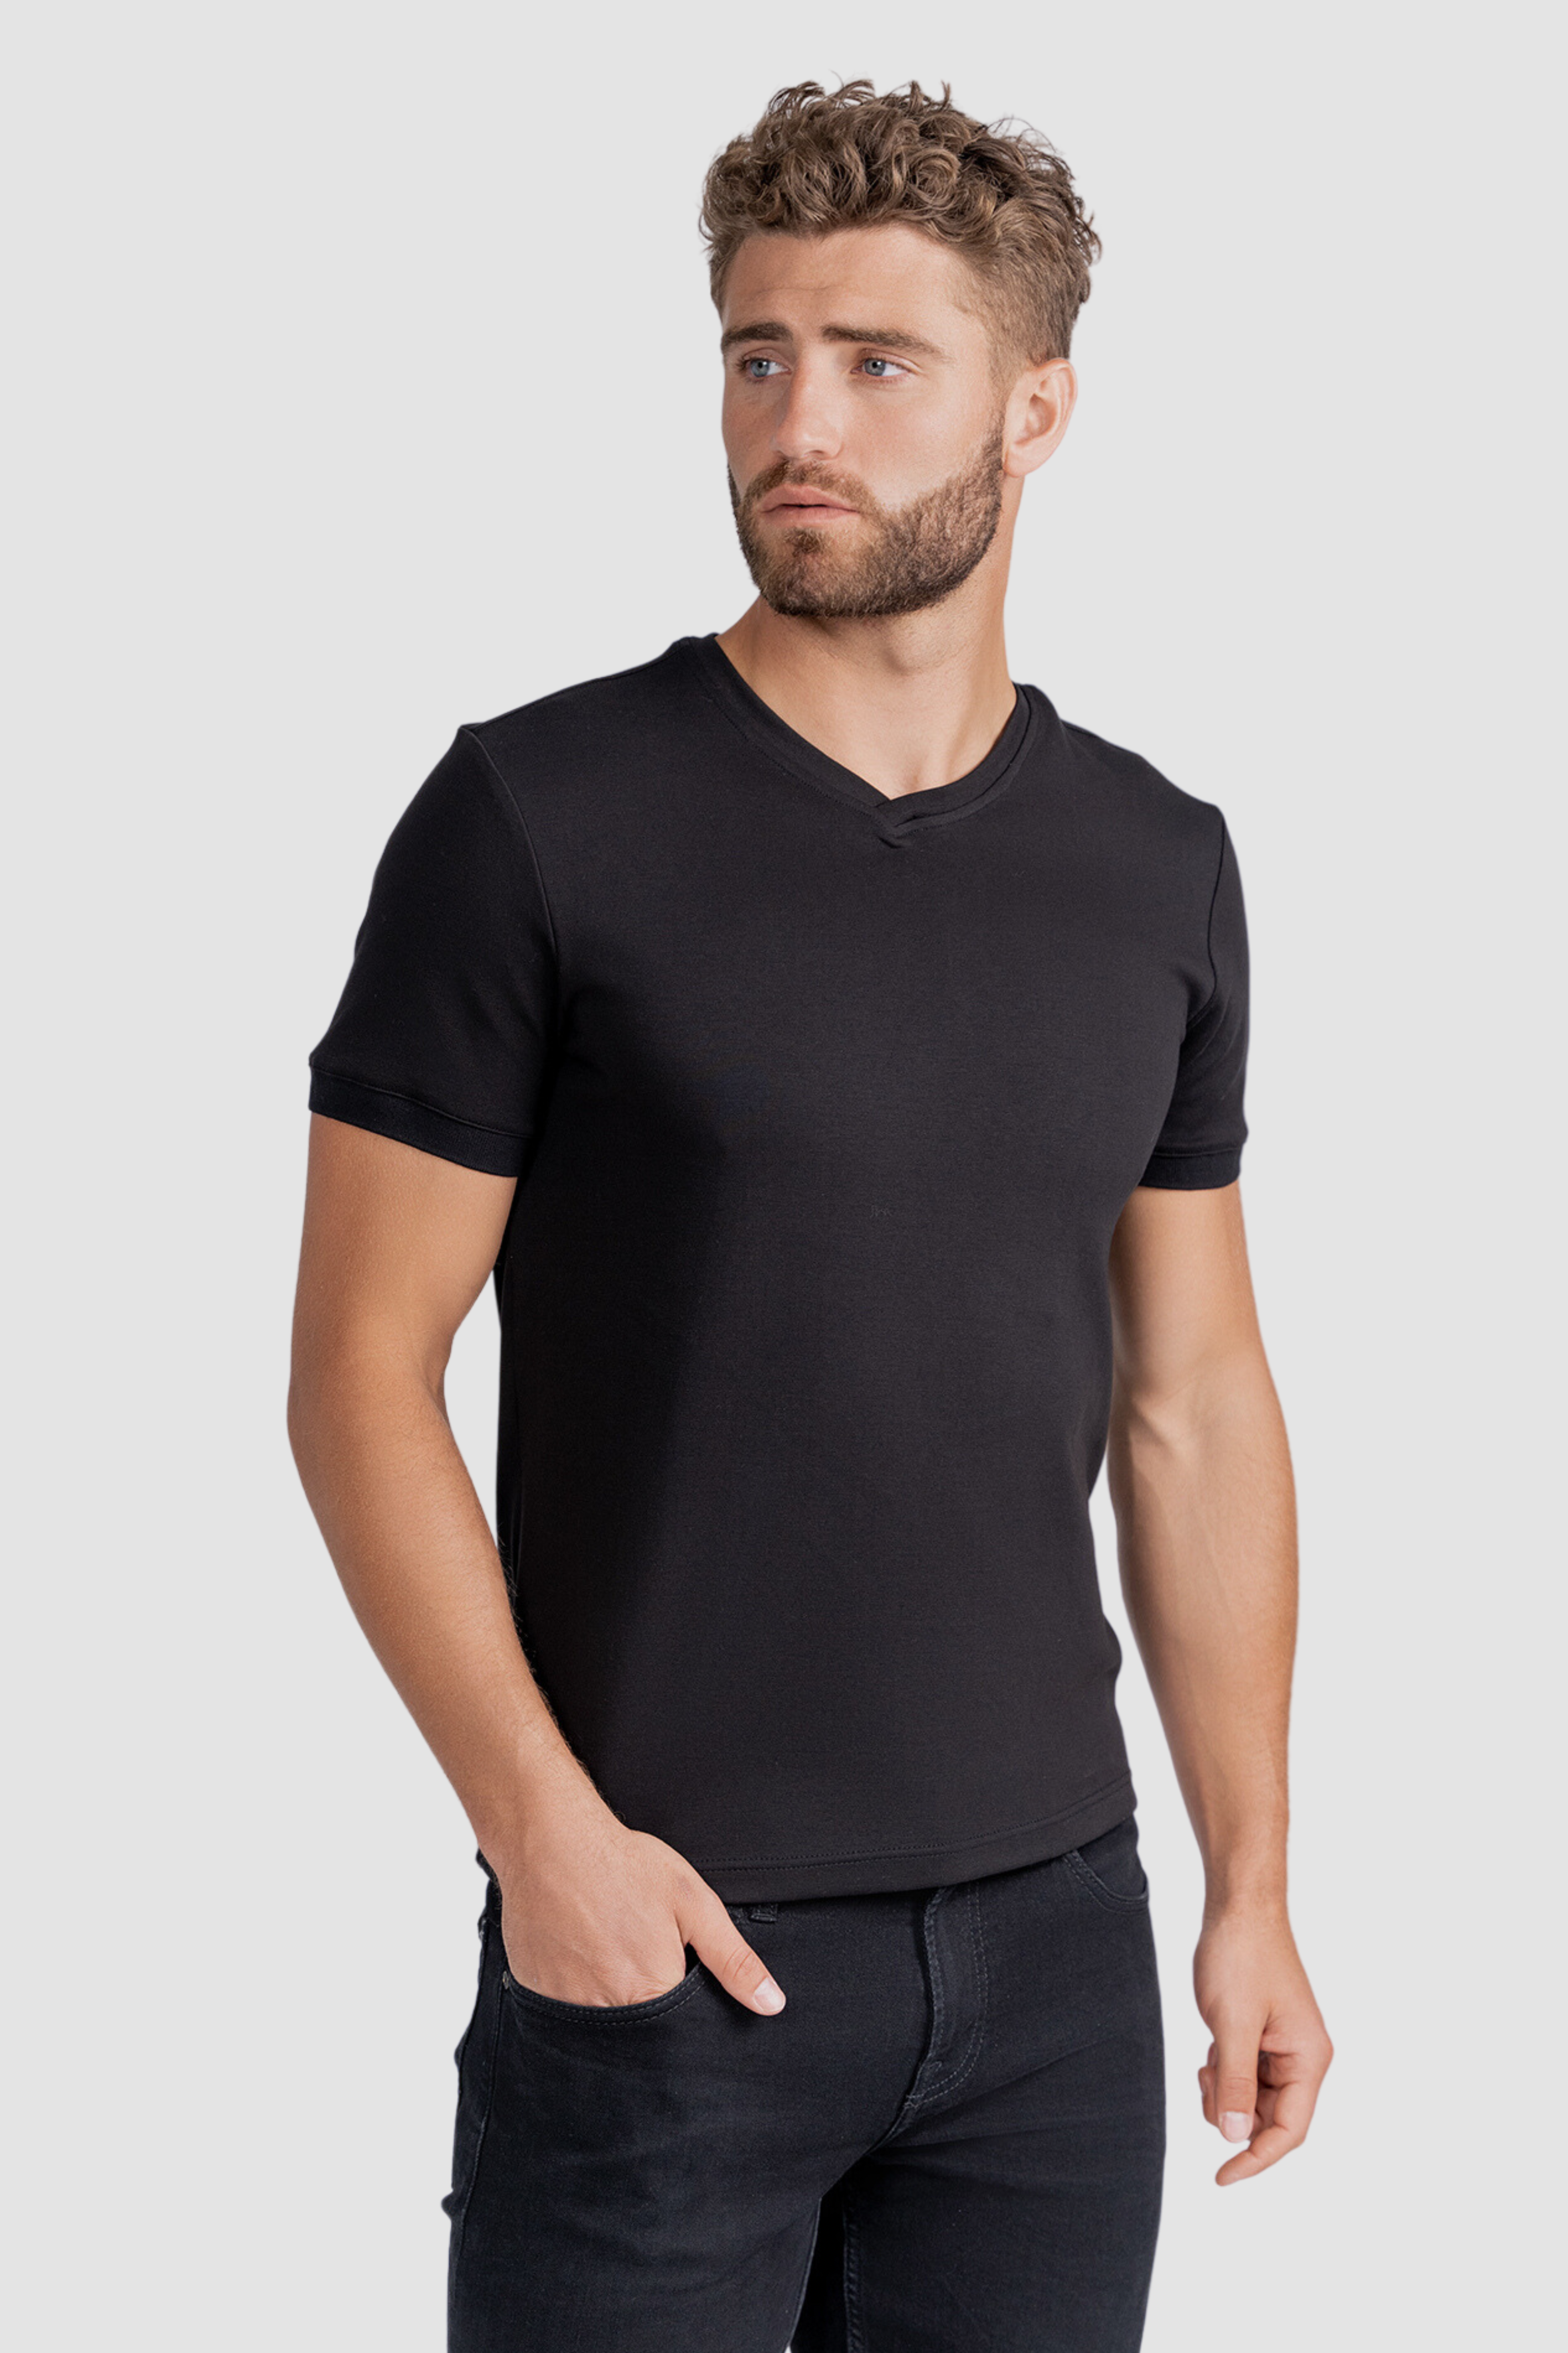 V Neck Vs Crew Neck T Shirt  Which One Is Better For Your